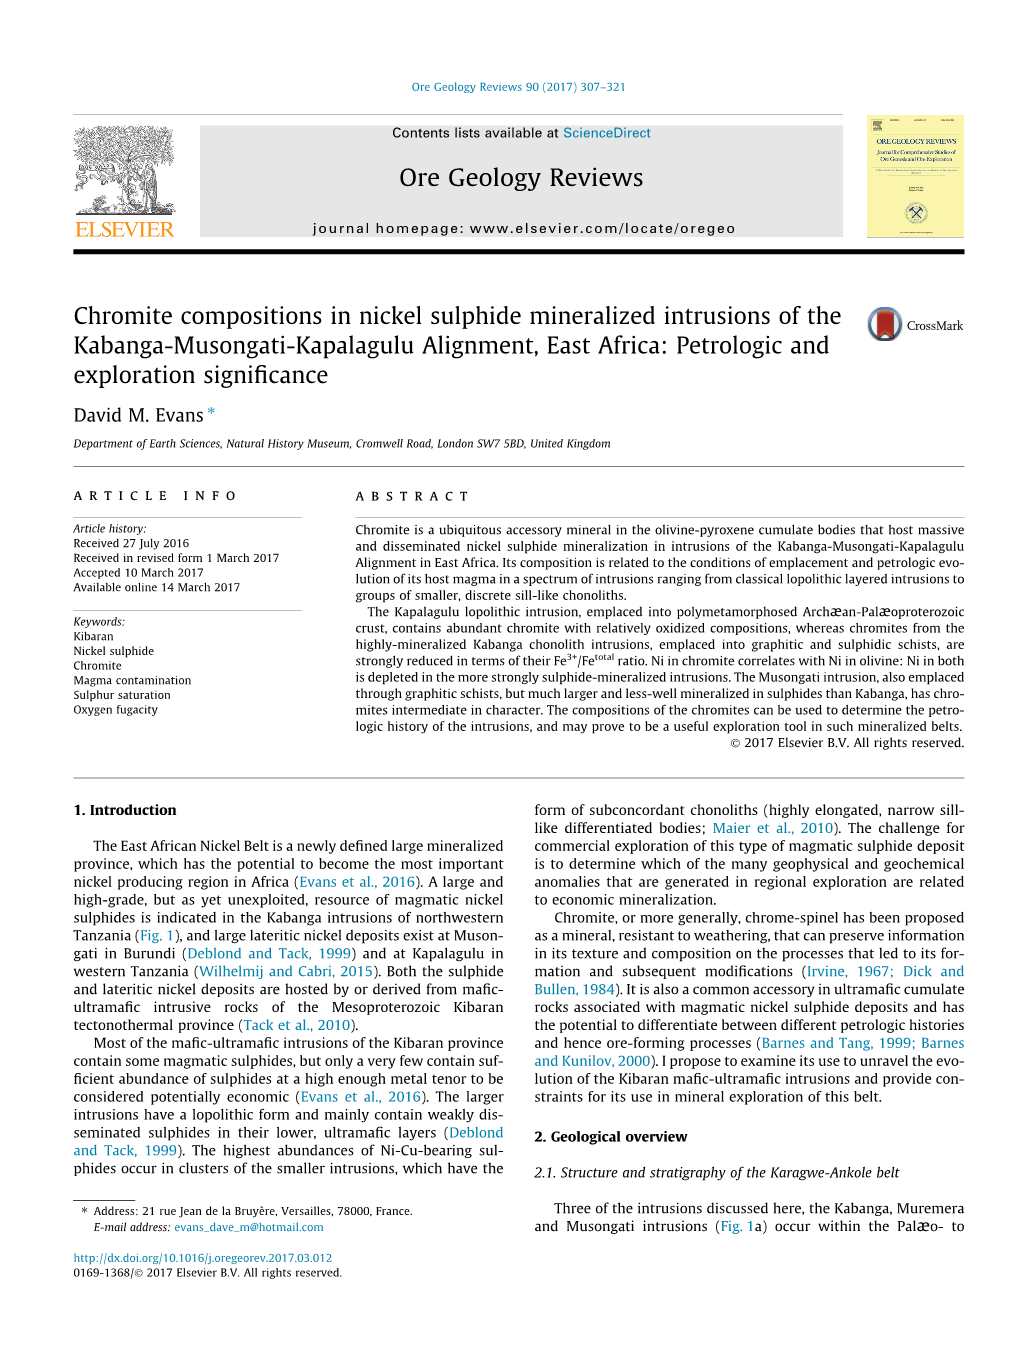 Chromite Compositions in Nickel Sulphide Mineralized Intrusions of the Kabanga-Musongati-Kapalagulu Alignment, East Africa: Petr